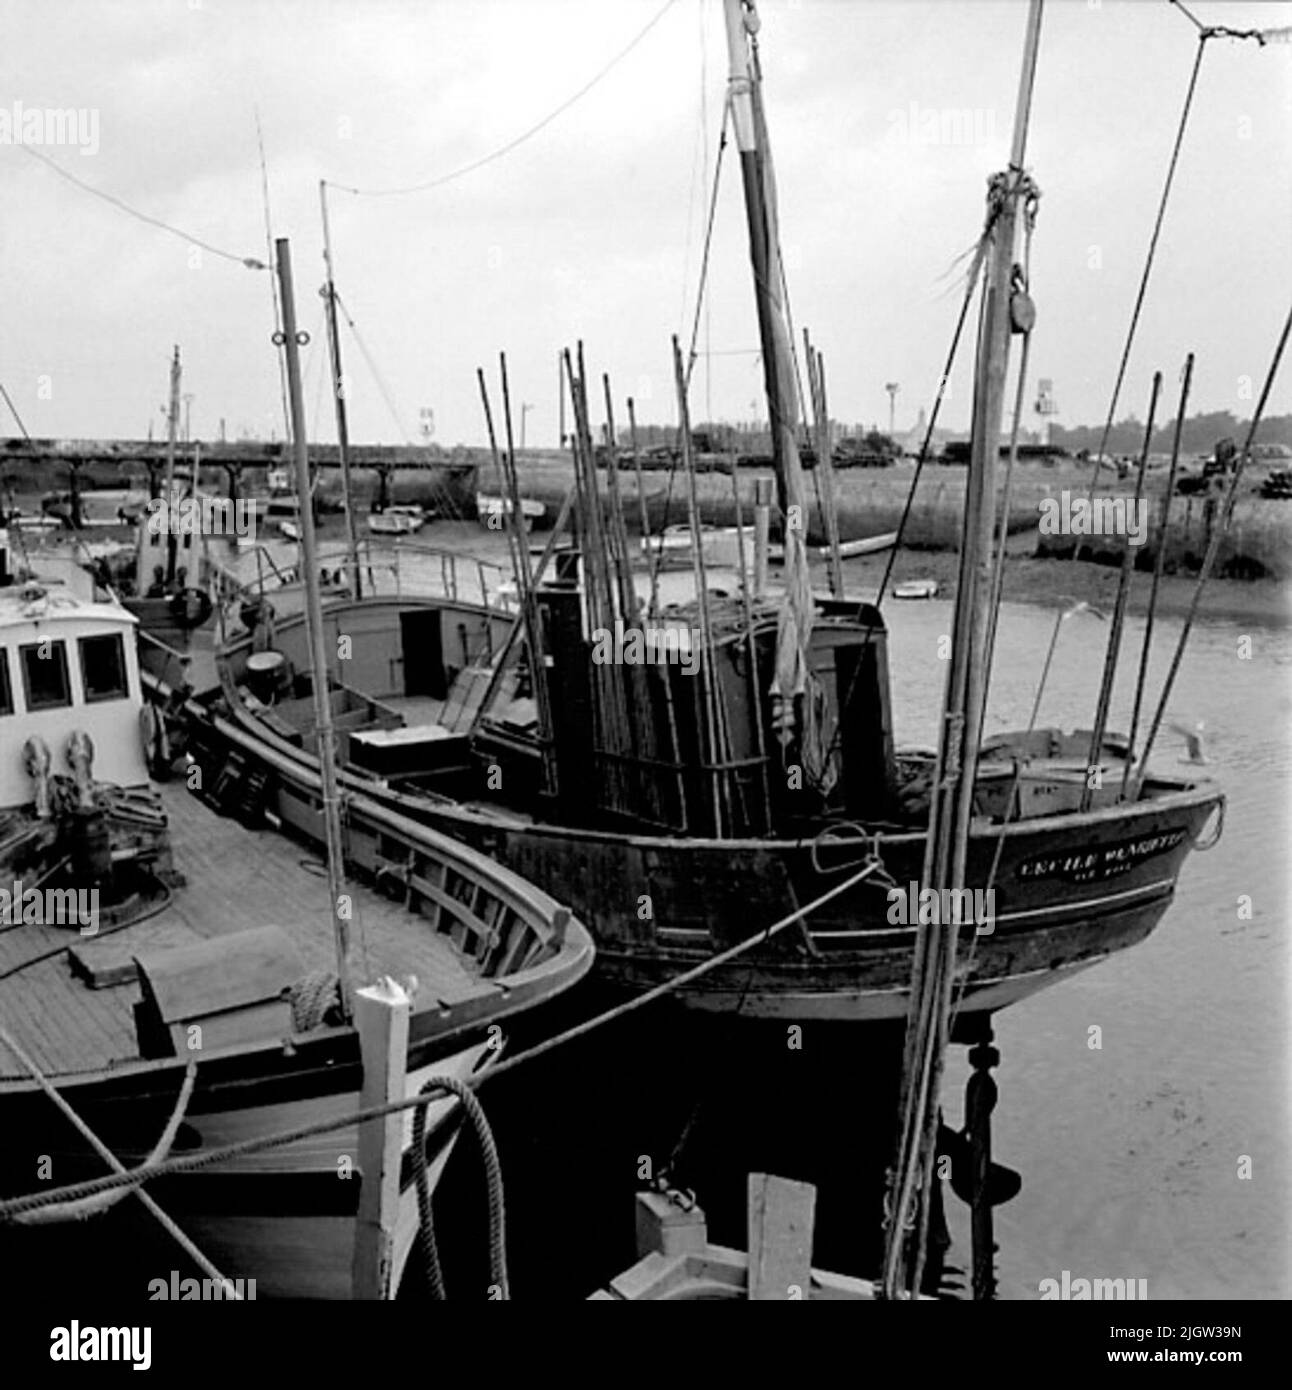 10. France. Photo journal is available at B.M.A. + Photo albums. Acquisition: Books and archive materials. Photos taken 1959-10-17.12 Pictures in series. According to notes: France. Atlantic coast, Le Croisic, 17/10-59. Boats of different types. Most common and oldest? Seems the boats with aft mirror to be, but boats with hedges or cruise only also occur. The latter appear to have first gained entry among the trawls, while the smaller boats are still clearly dominated by the stern type. A number of boats are in a port. Stock Photo